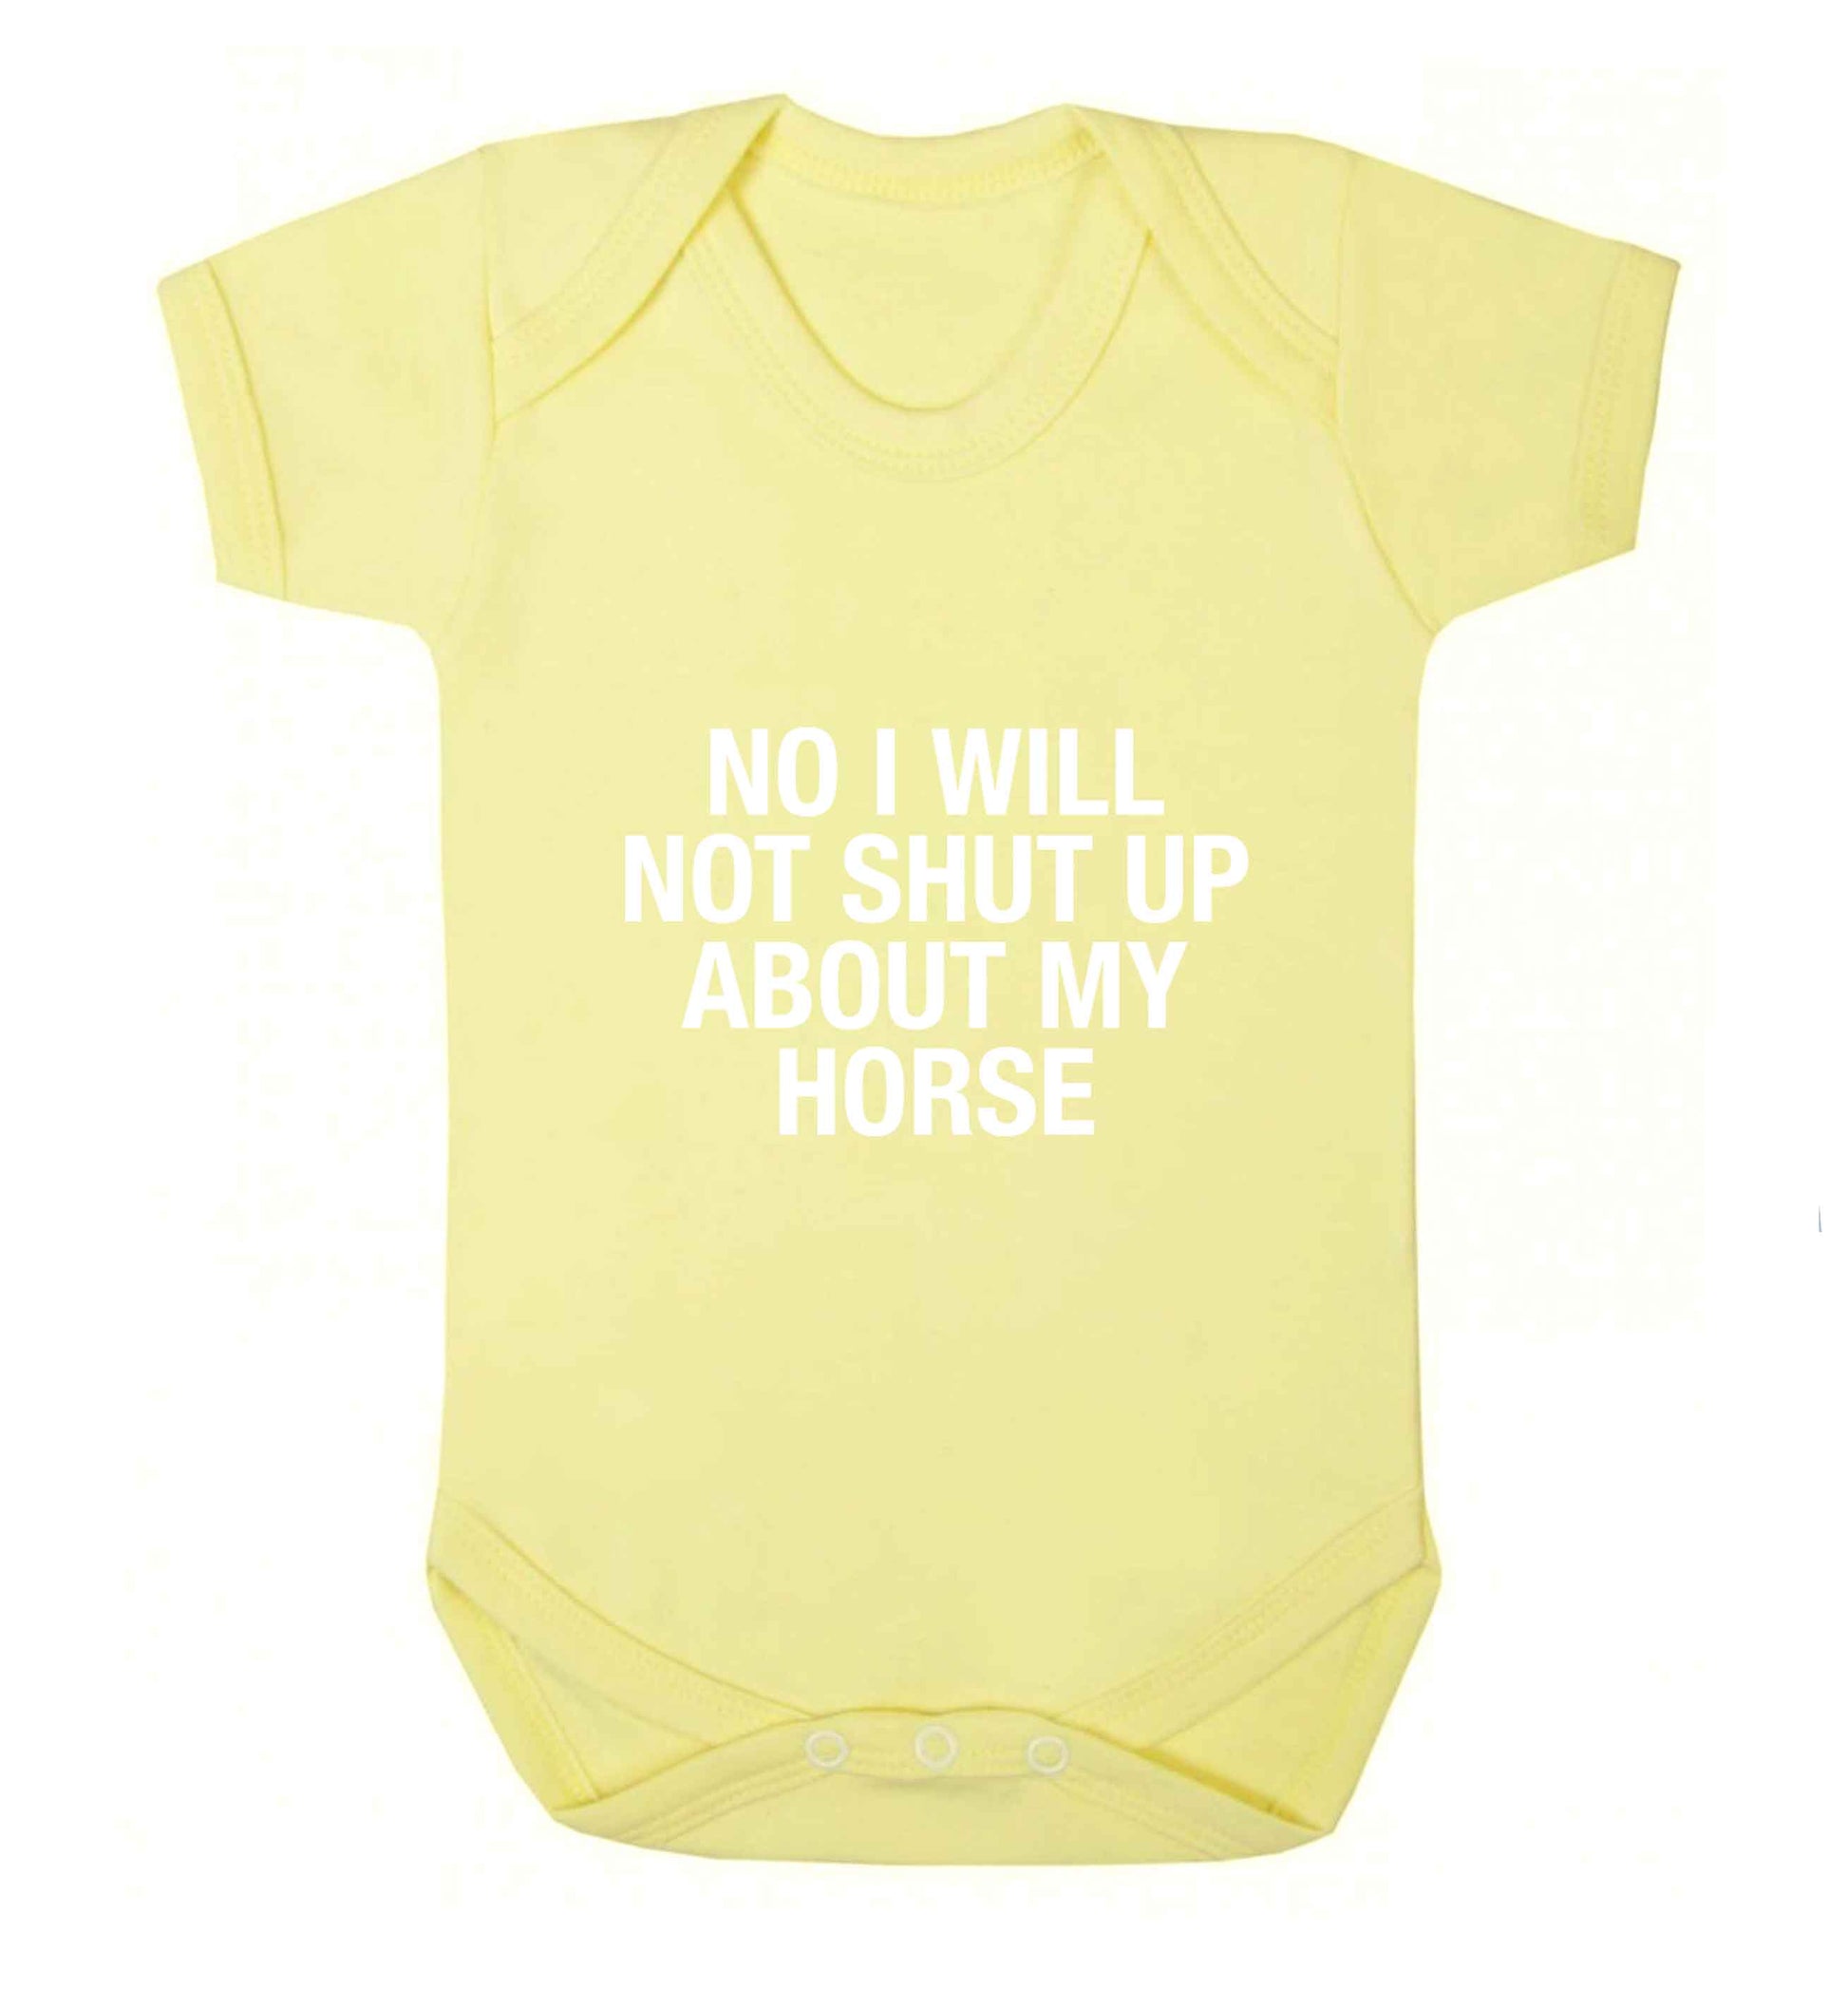 No I will not shut up talking about my horse baby vest pale yellow 18-24 months